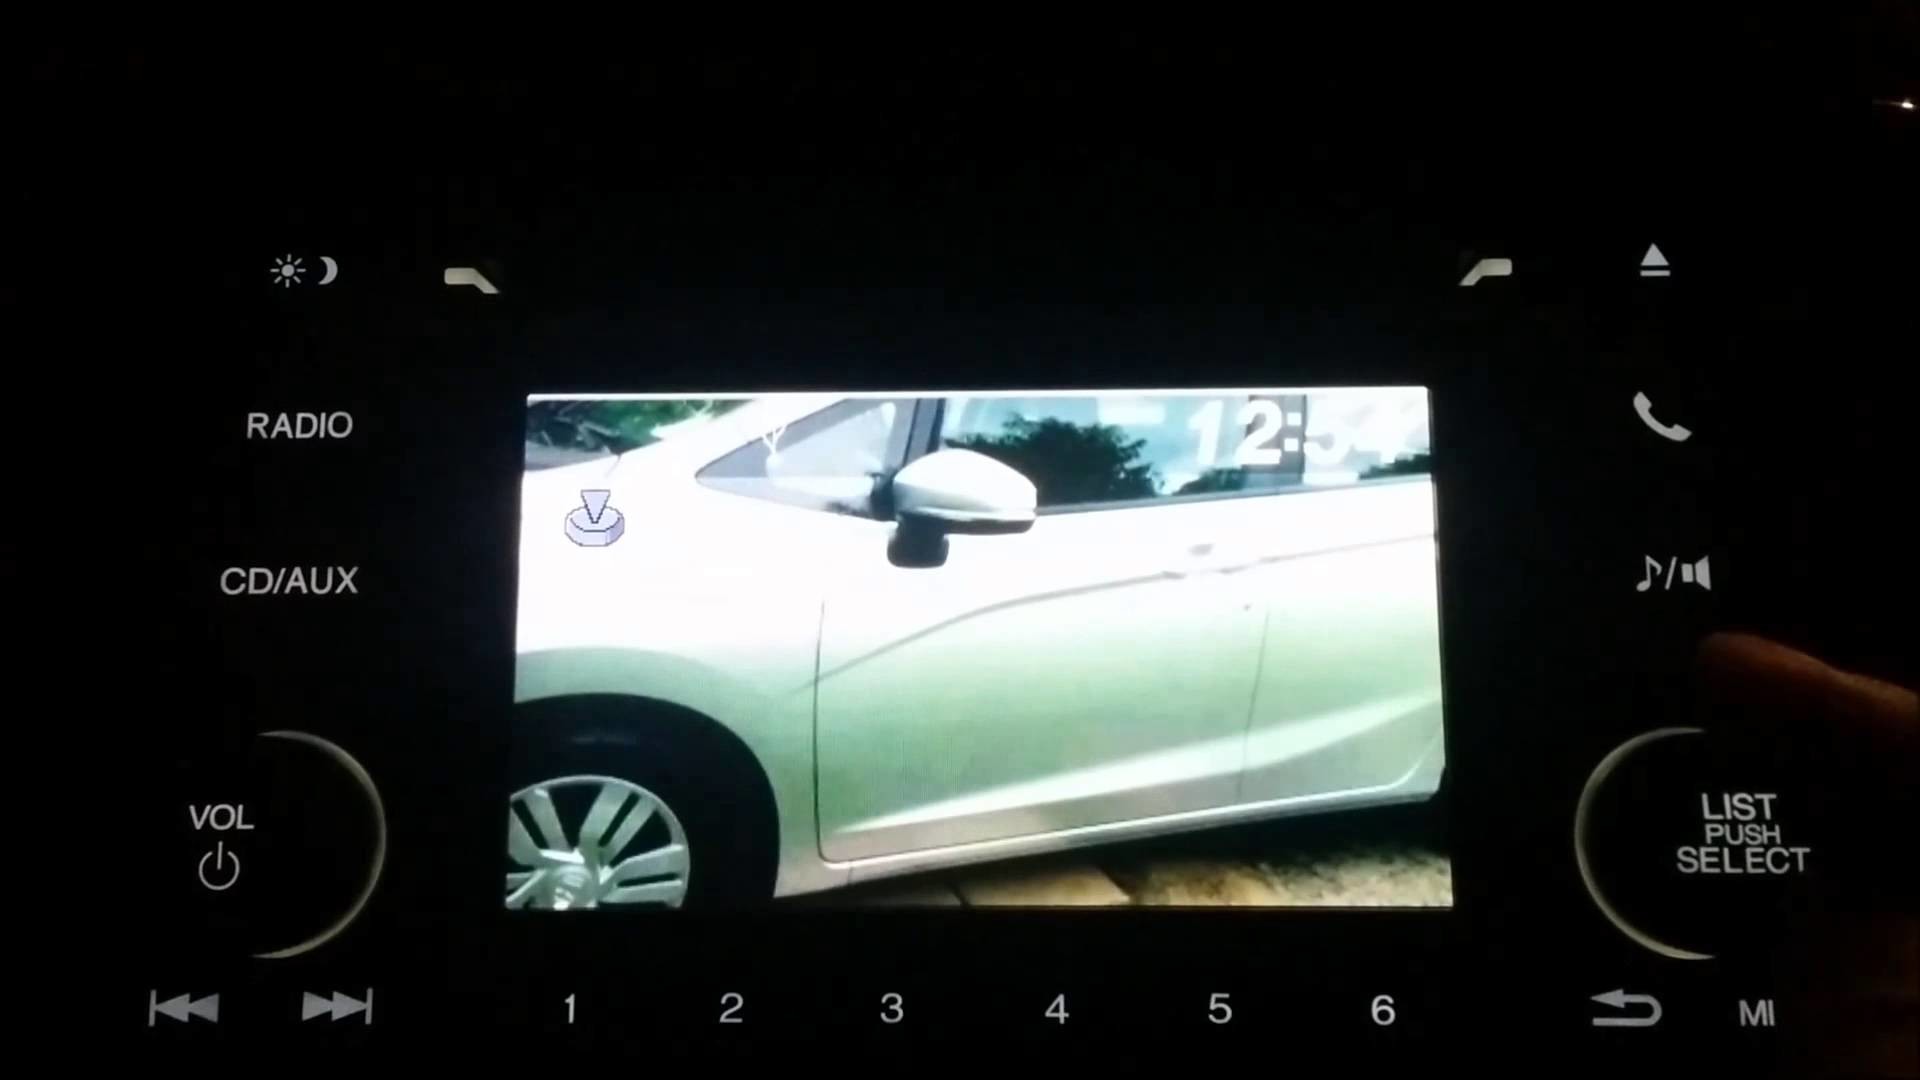 1920x1080 2015 Honda Fit LX How to load Wallpaper Image on 5 inch Stereo Receiver  (How to Video)